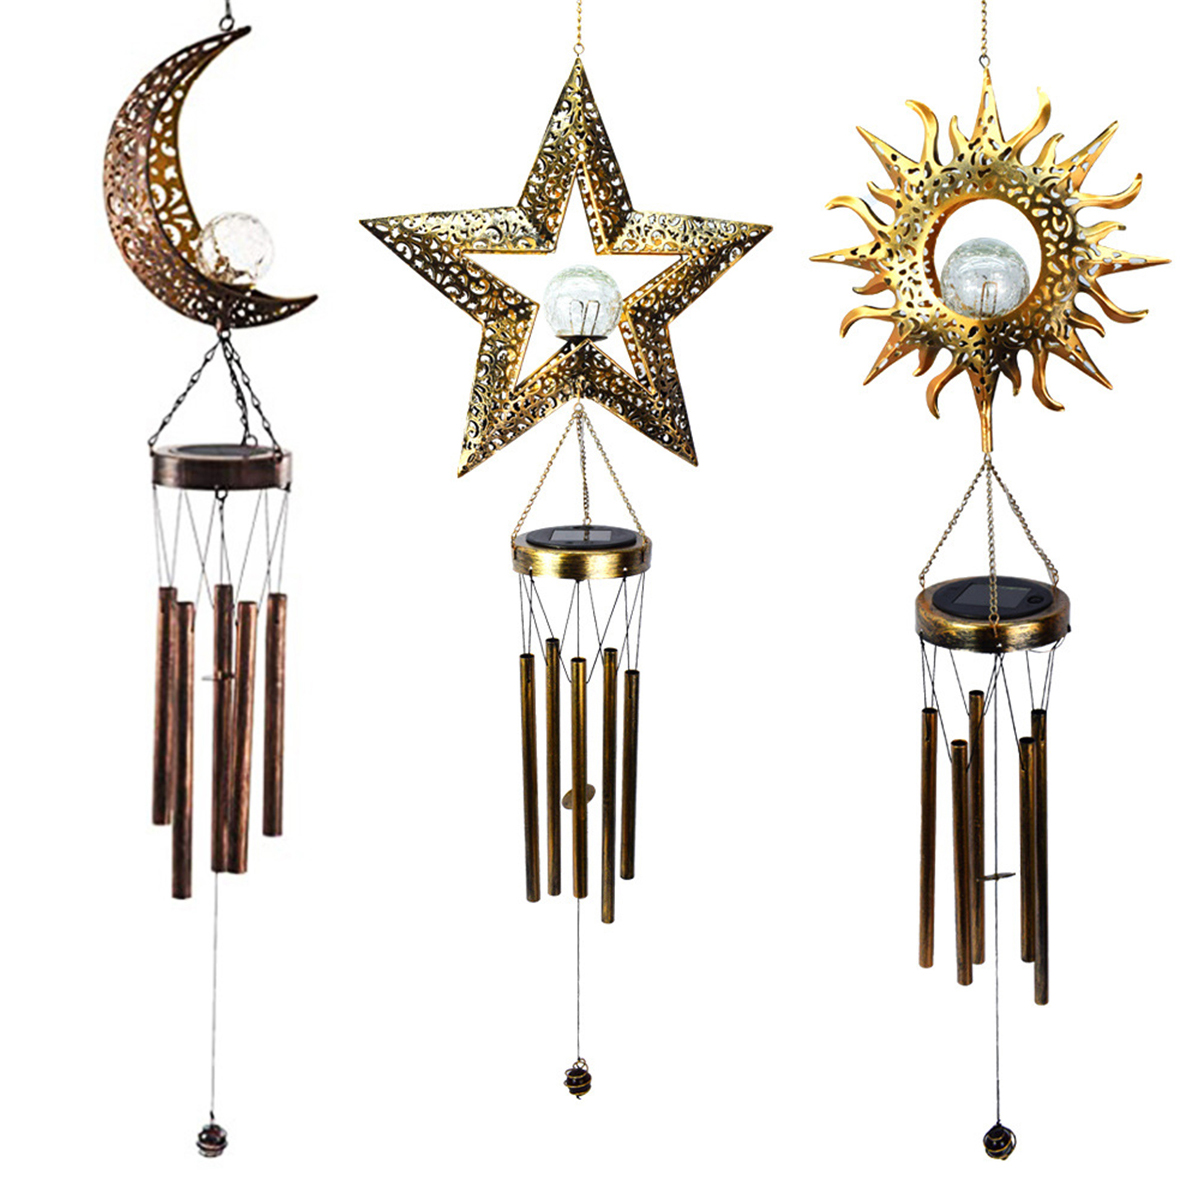 Wind-Bell-LED-Solar-Powered-Lamp-Home-Outdoor-Indoor-Decor-Gift-Moon-Sun-Star-1851218-1